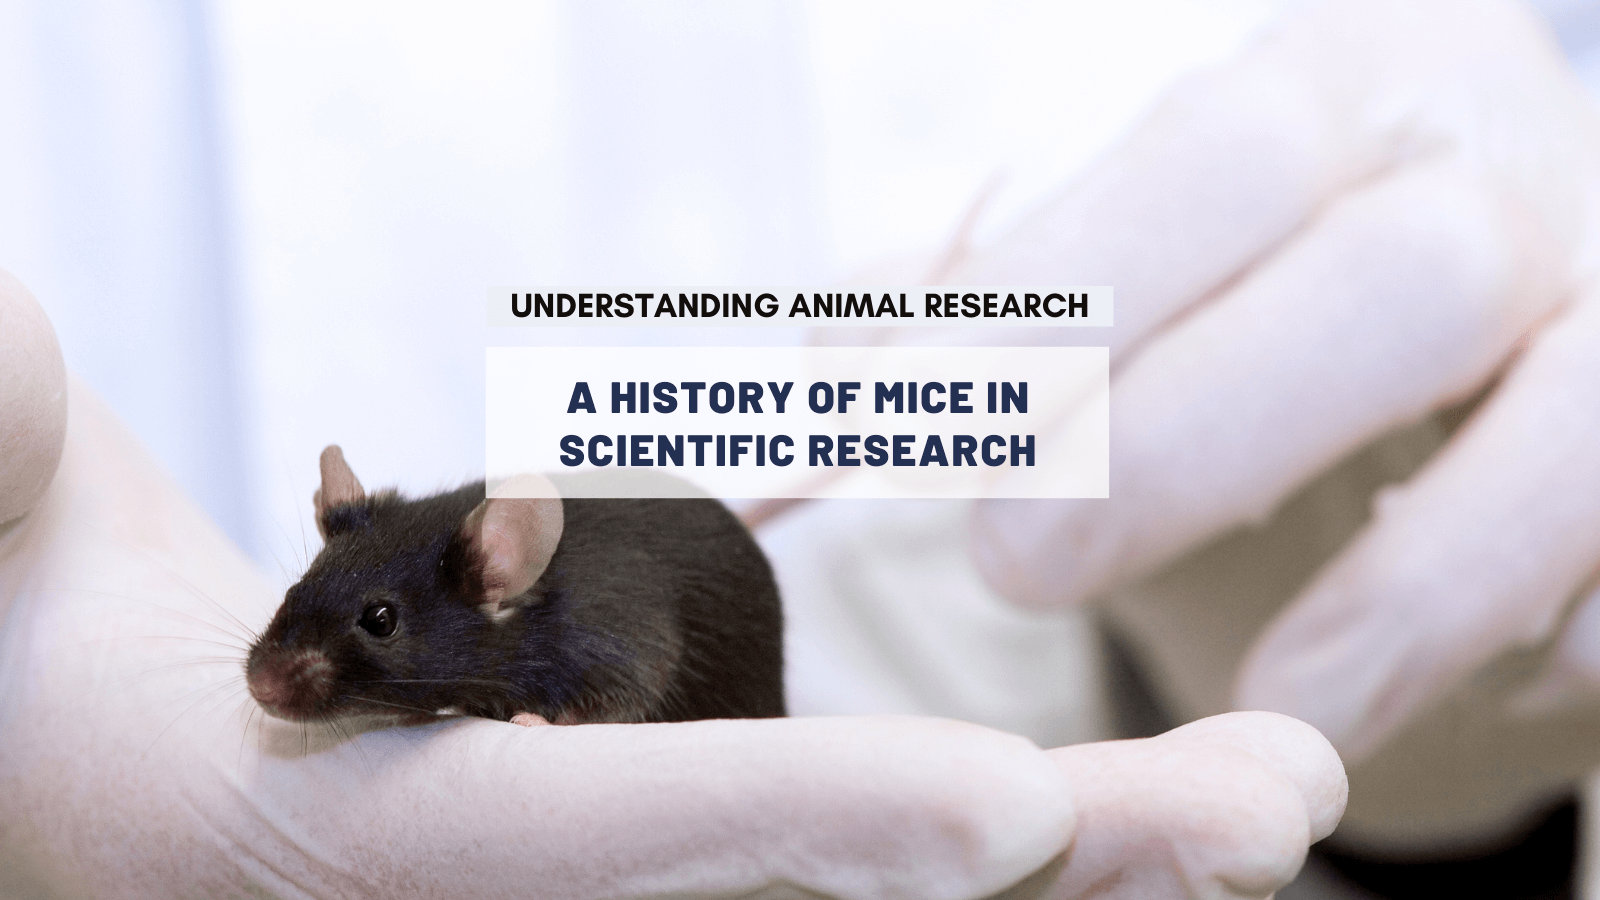 A history of mice in scientific research